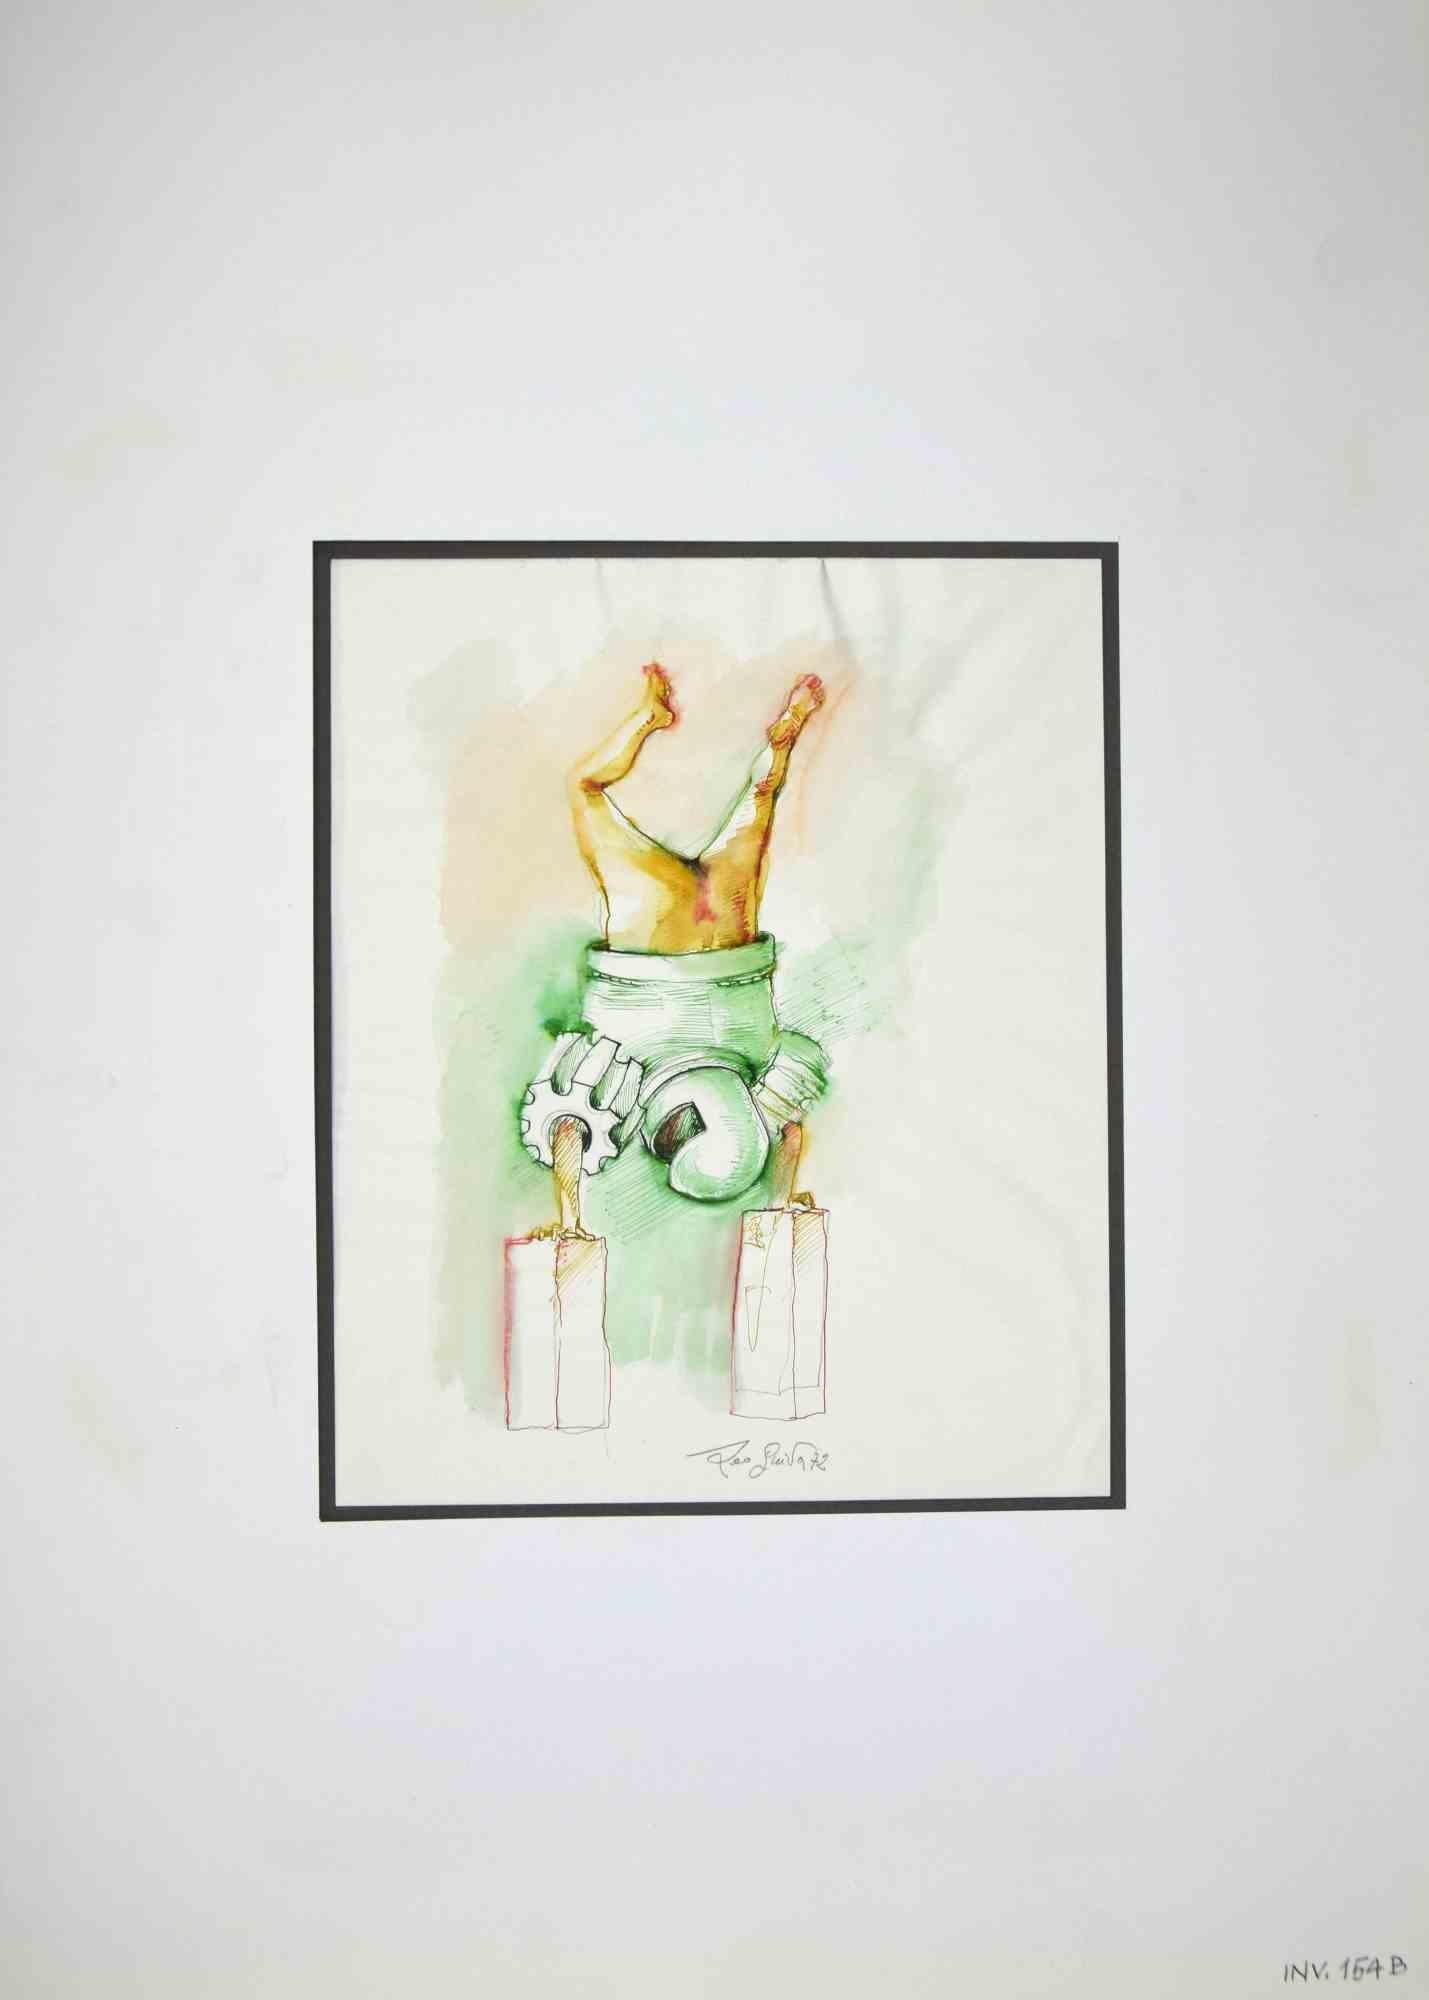 Juggler is an original drawing in watercolor and ink realized by Leo Guida in 1972.

Good condition.

Hand-signed.

The artwork is depicted through strong strokes in harmonious colors.